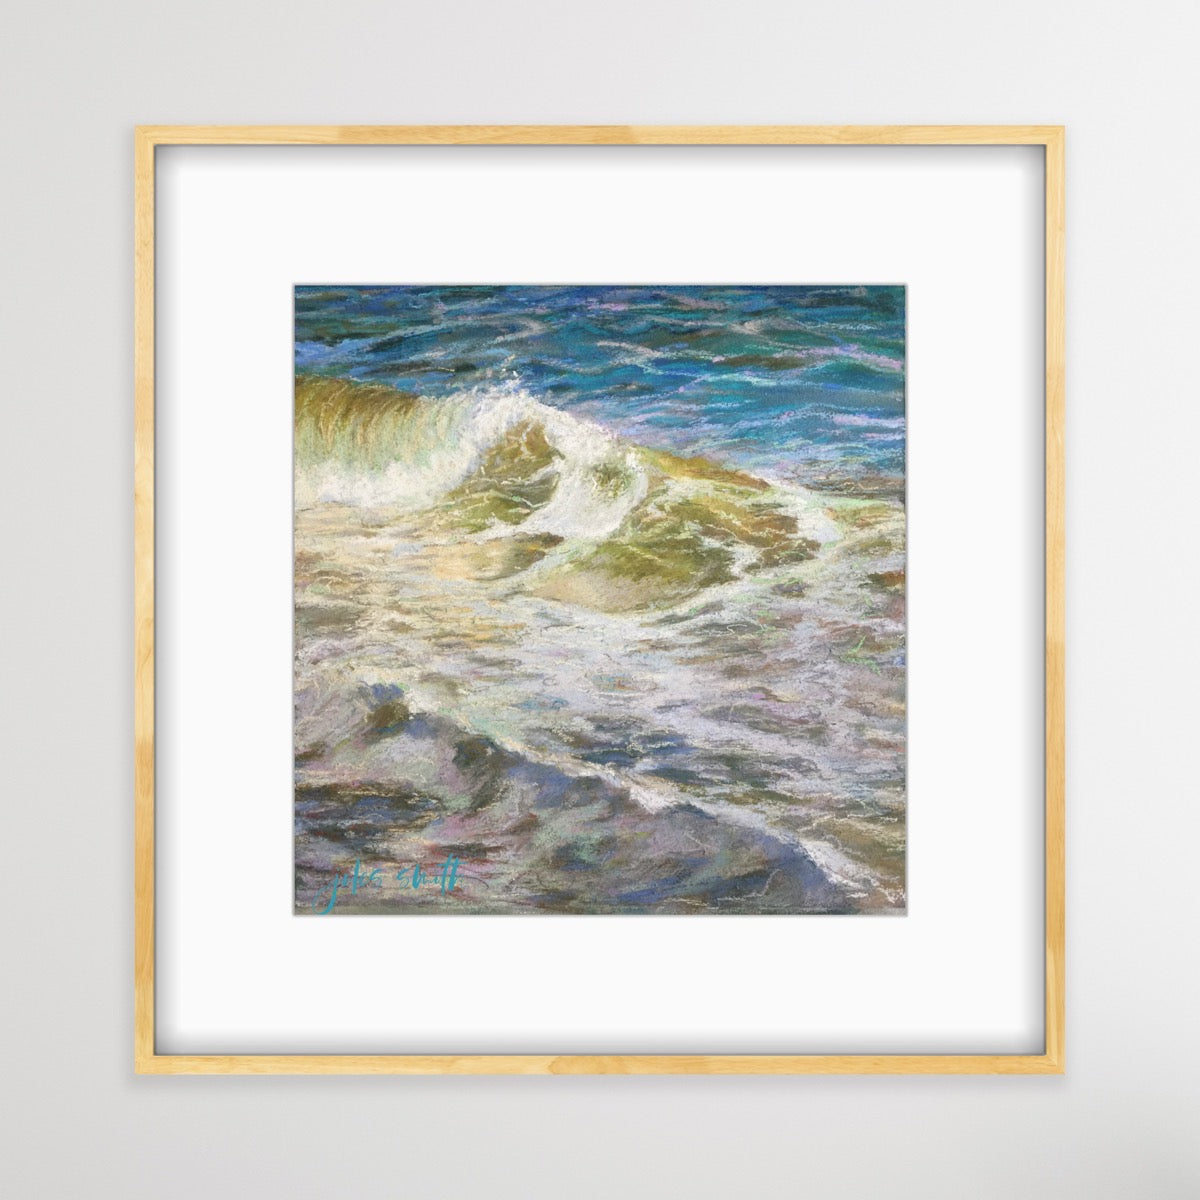 Shore break - Morning Waves Rolling in - Giclee Reproduction Print of Original Pastel Painting